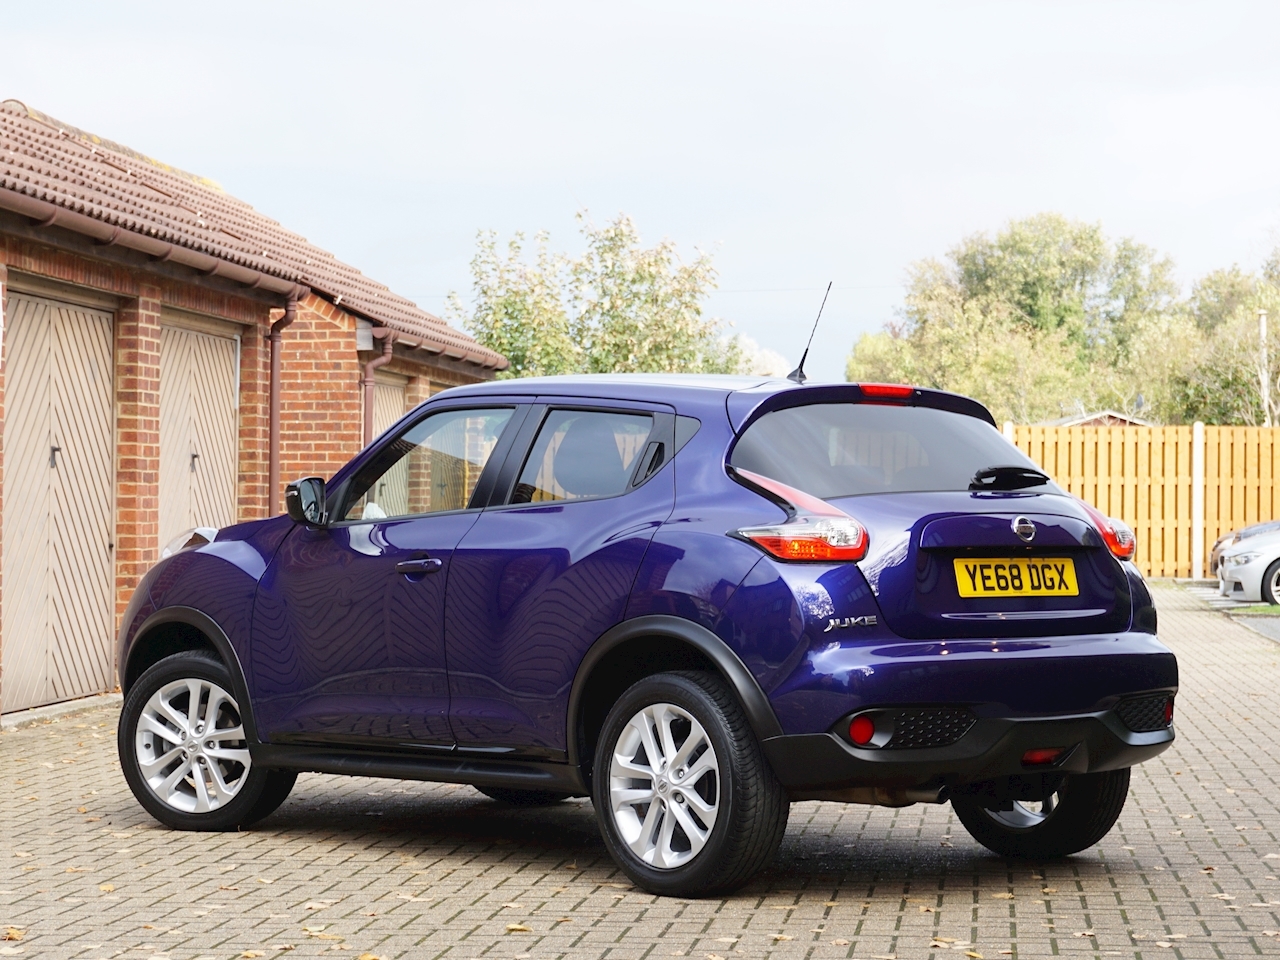 Juke 1.2 DIG-T Bose Personal Edition SUV 5dr Petrol (s/s) (115 ps)